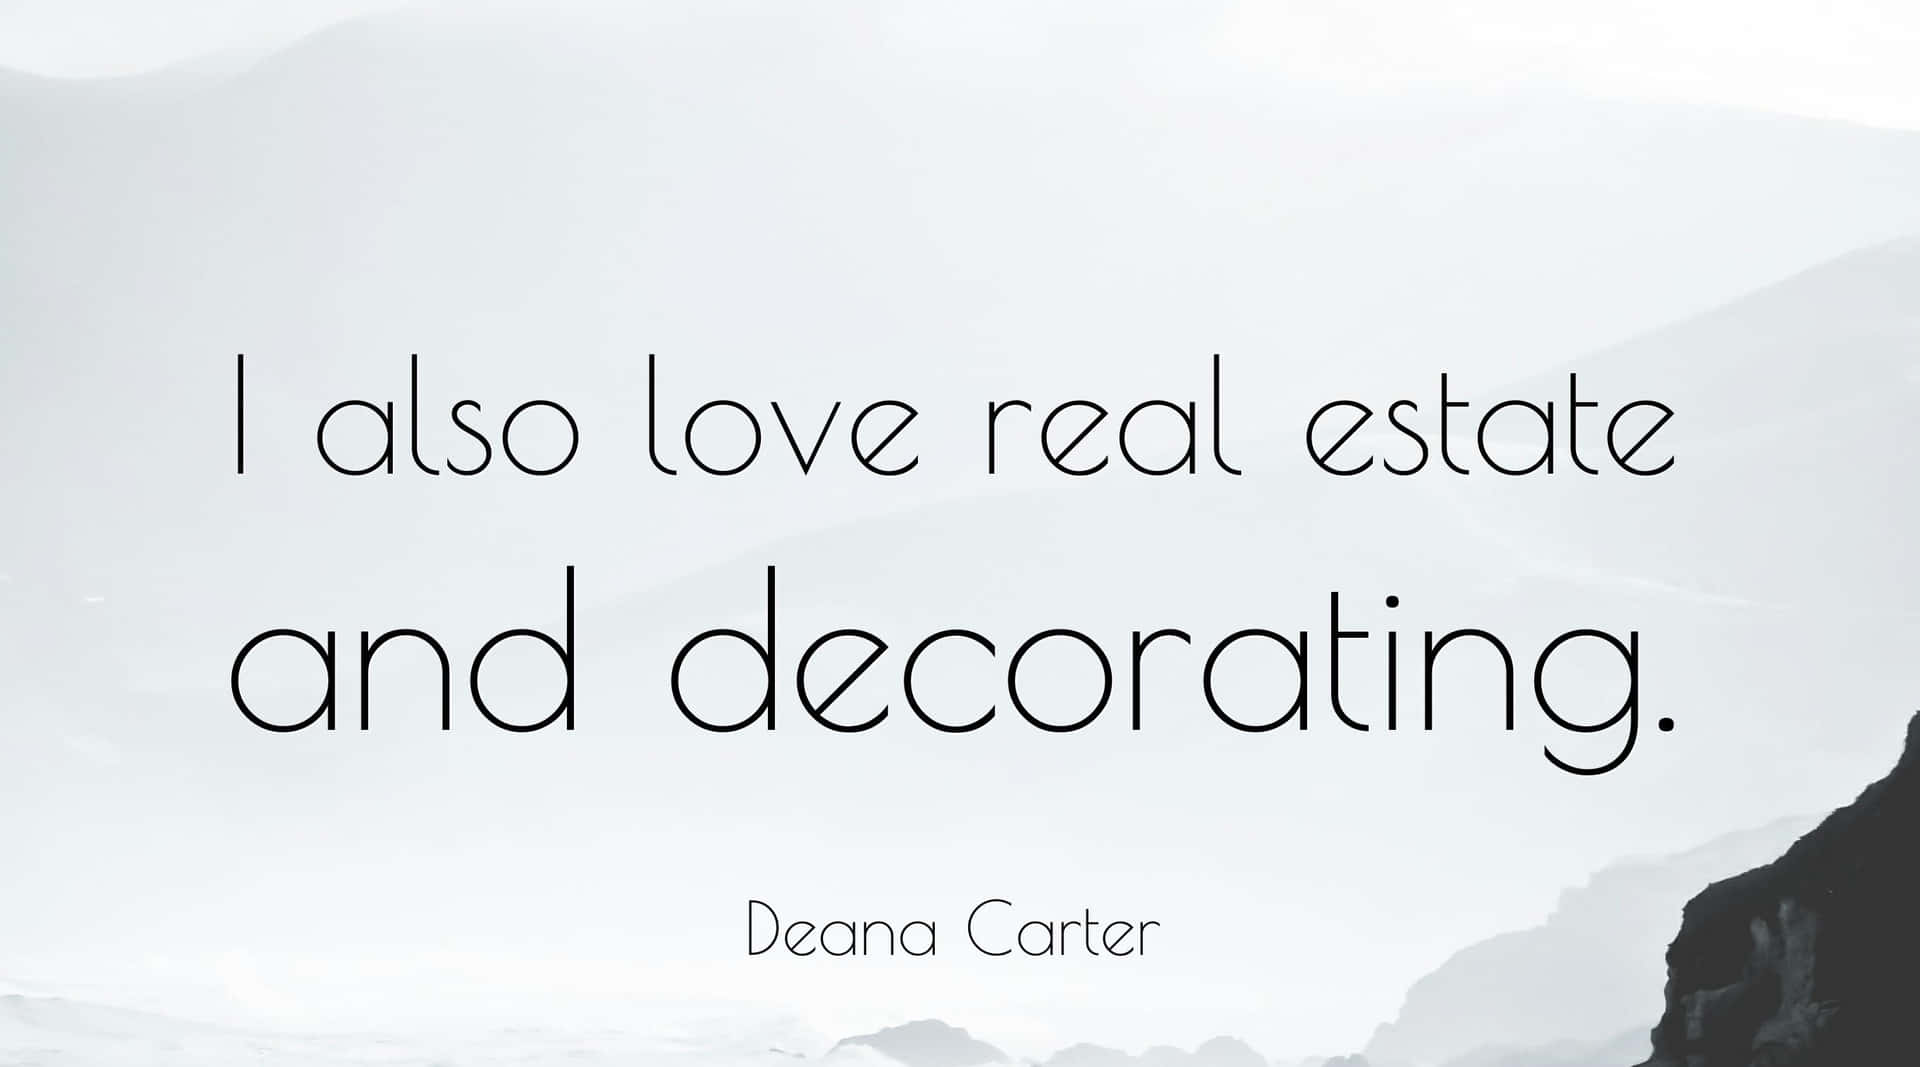 A Quote That Says I Also Love Real Estate And Decorating